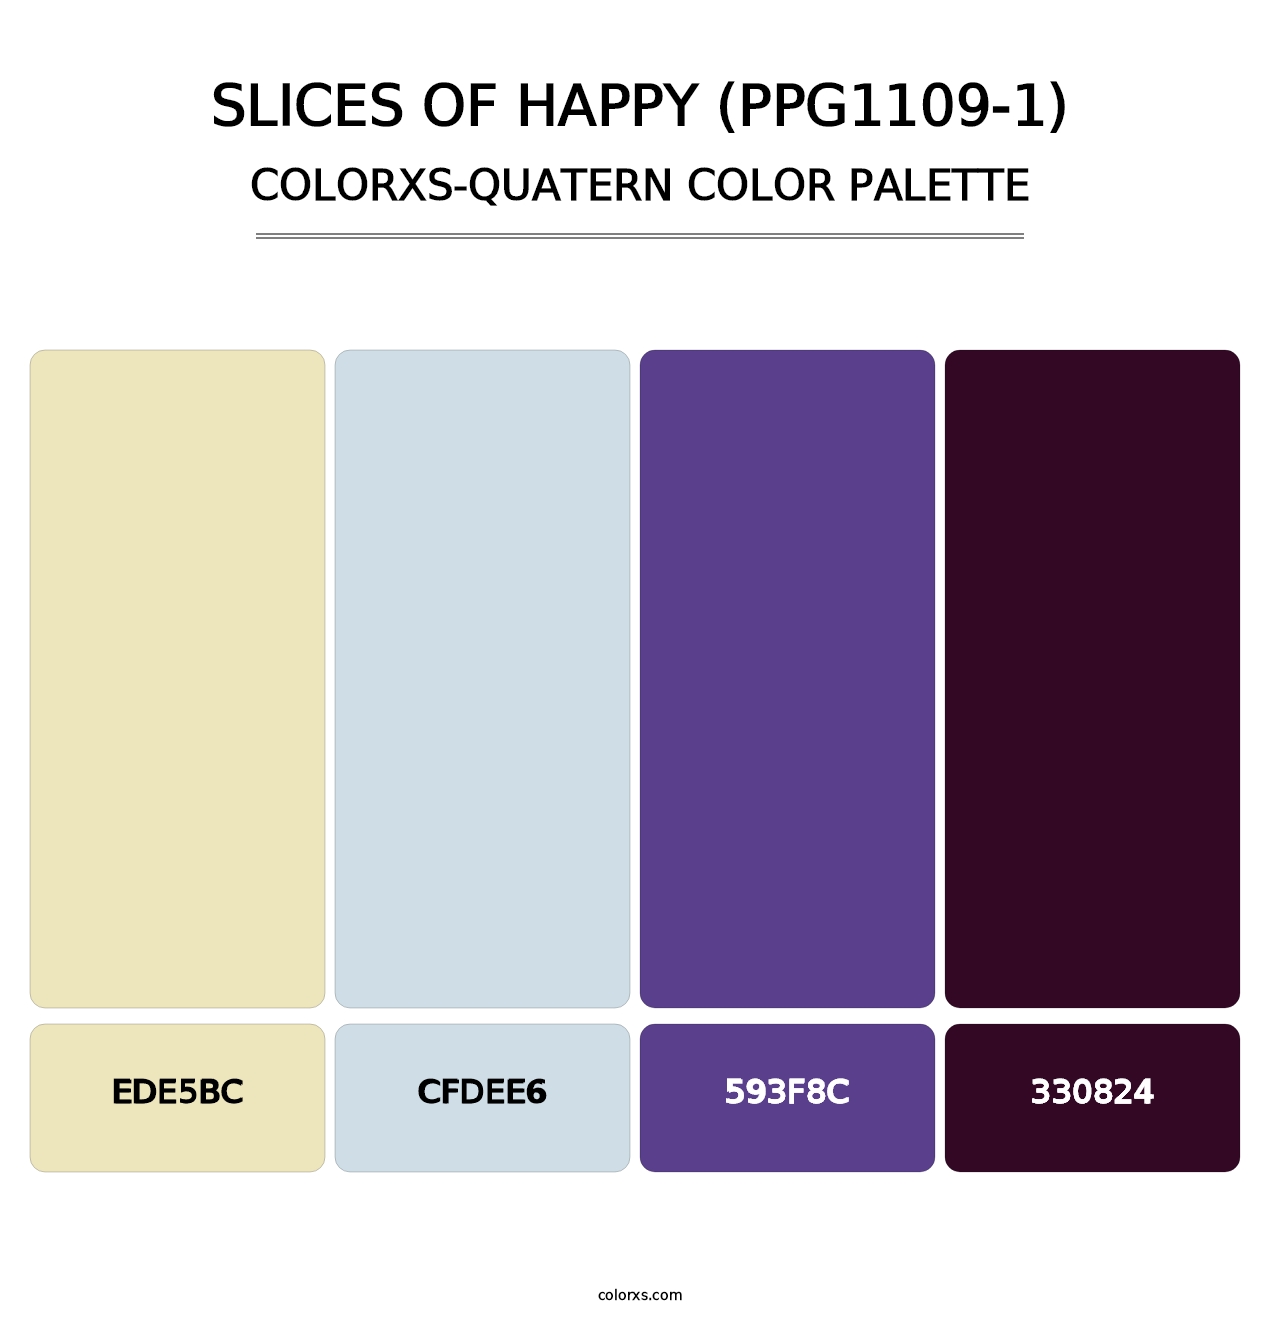 Slices Of Happy (PPG1109-1) - Colorxs Quatern Palette